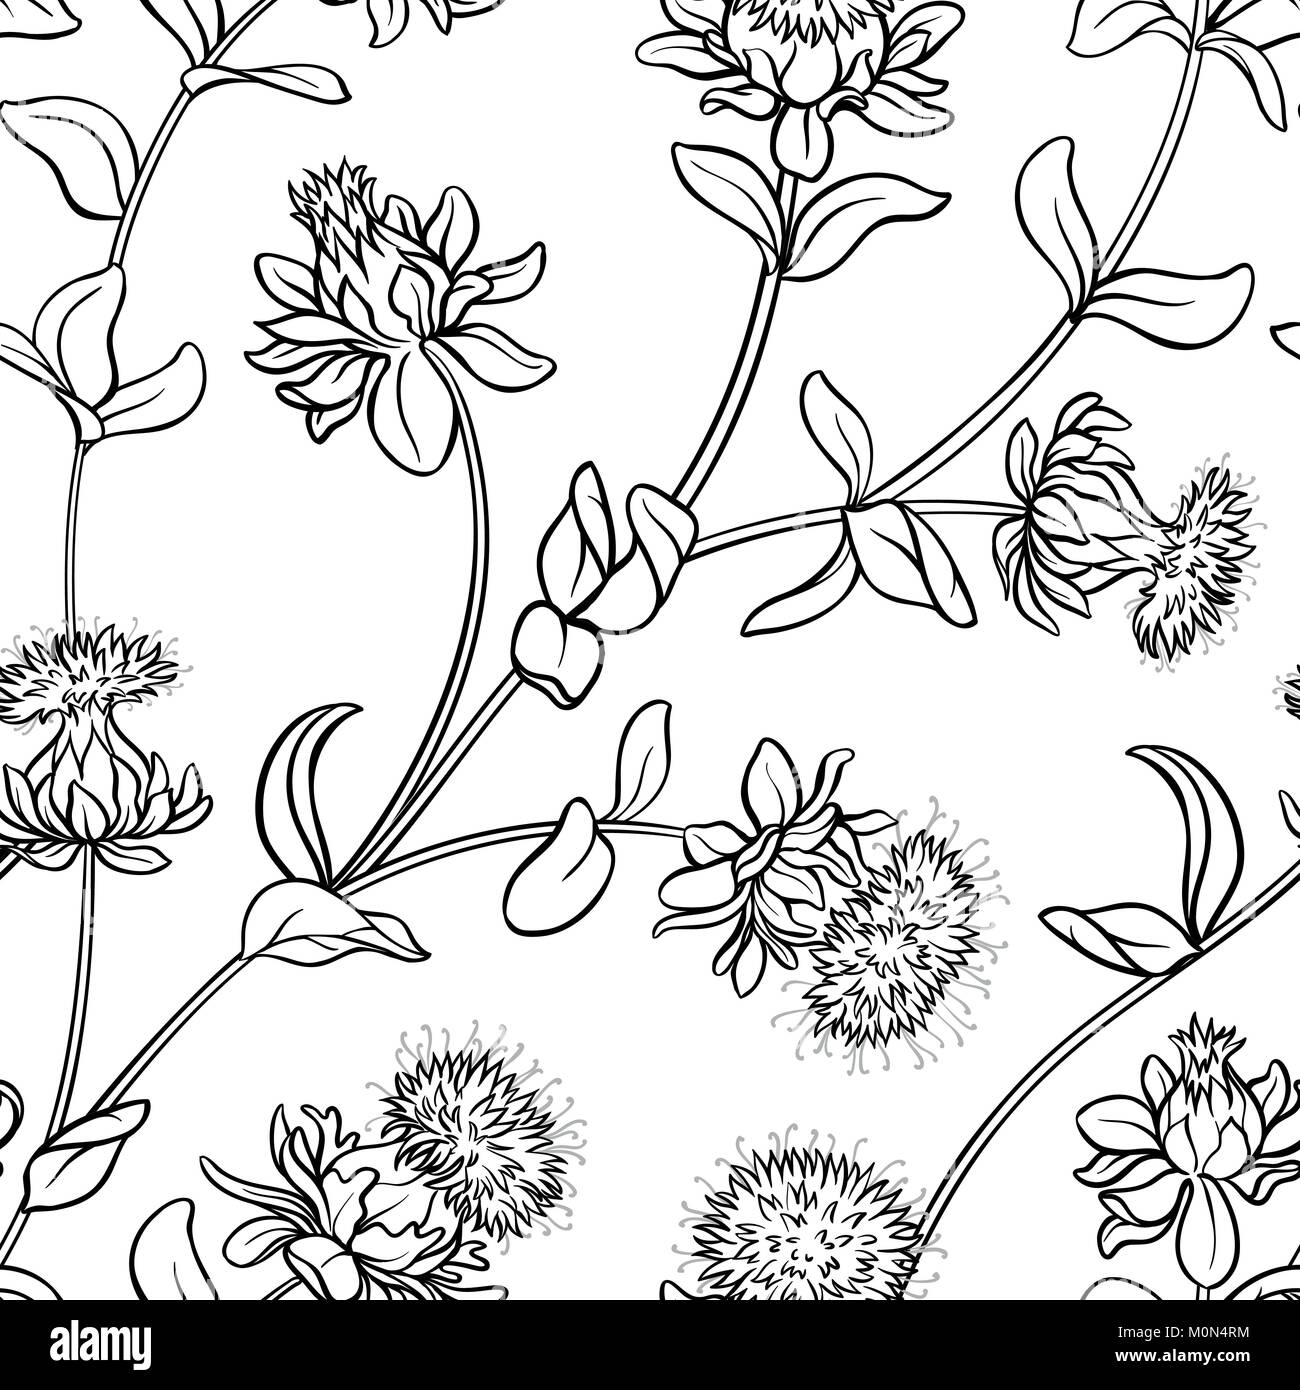 safflower plant seamless pattern on white background Stock Vector